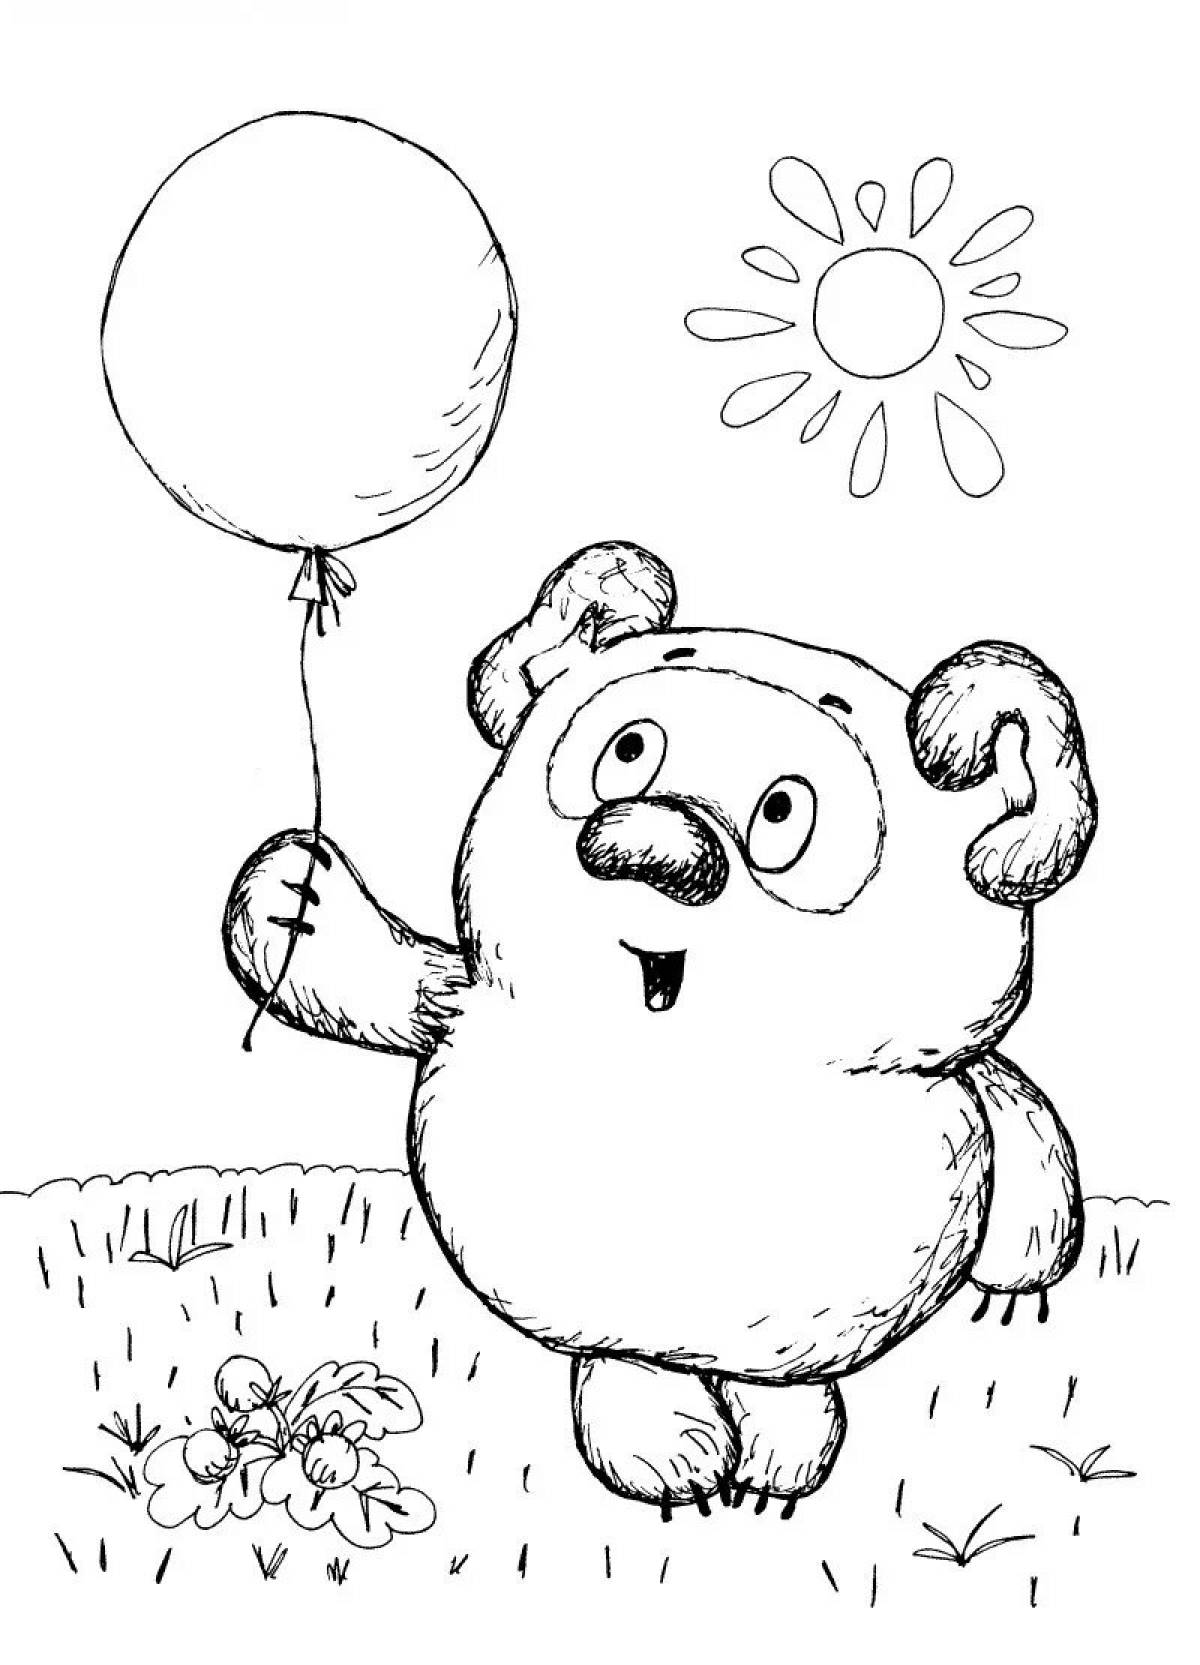 Blissful fluff coloring page